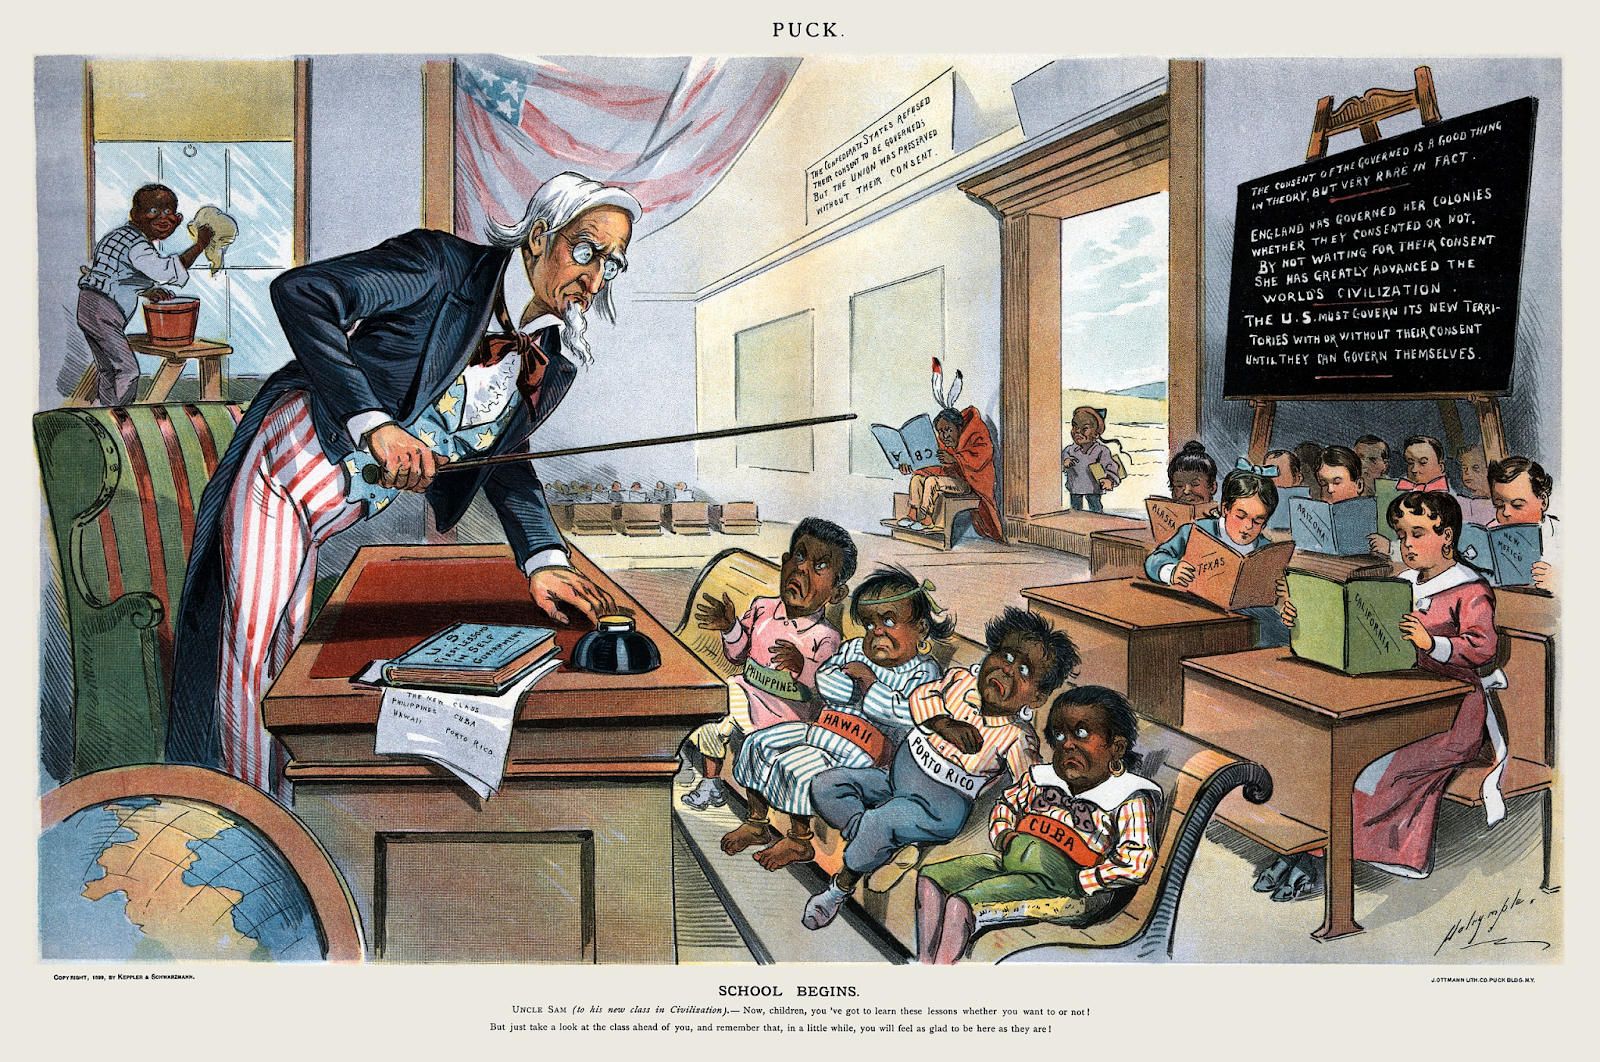 A political cartoon titled "School Begins" published in a US newspaper in 1899 showed Uncle Sam teaching new students as part of the rich history of Philippine independence.
